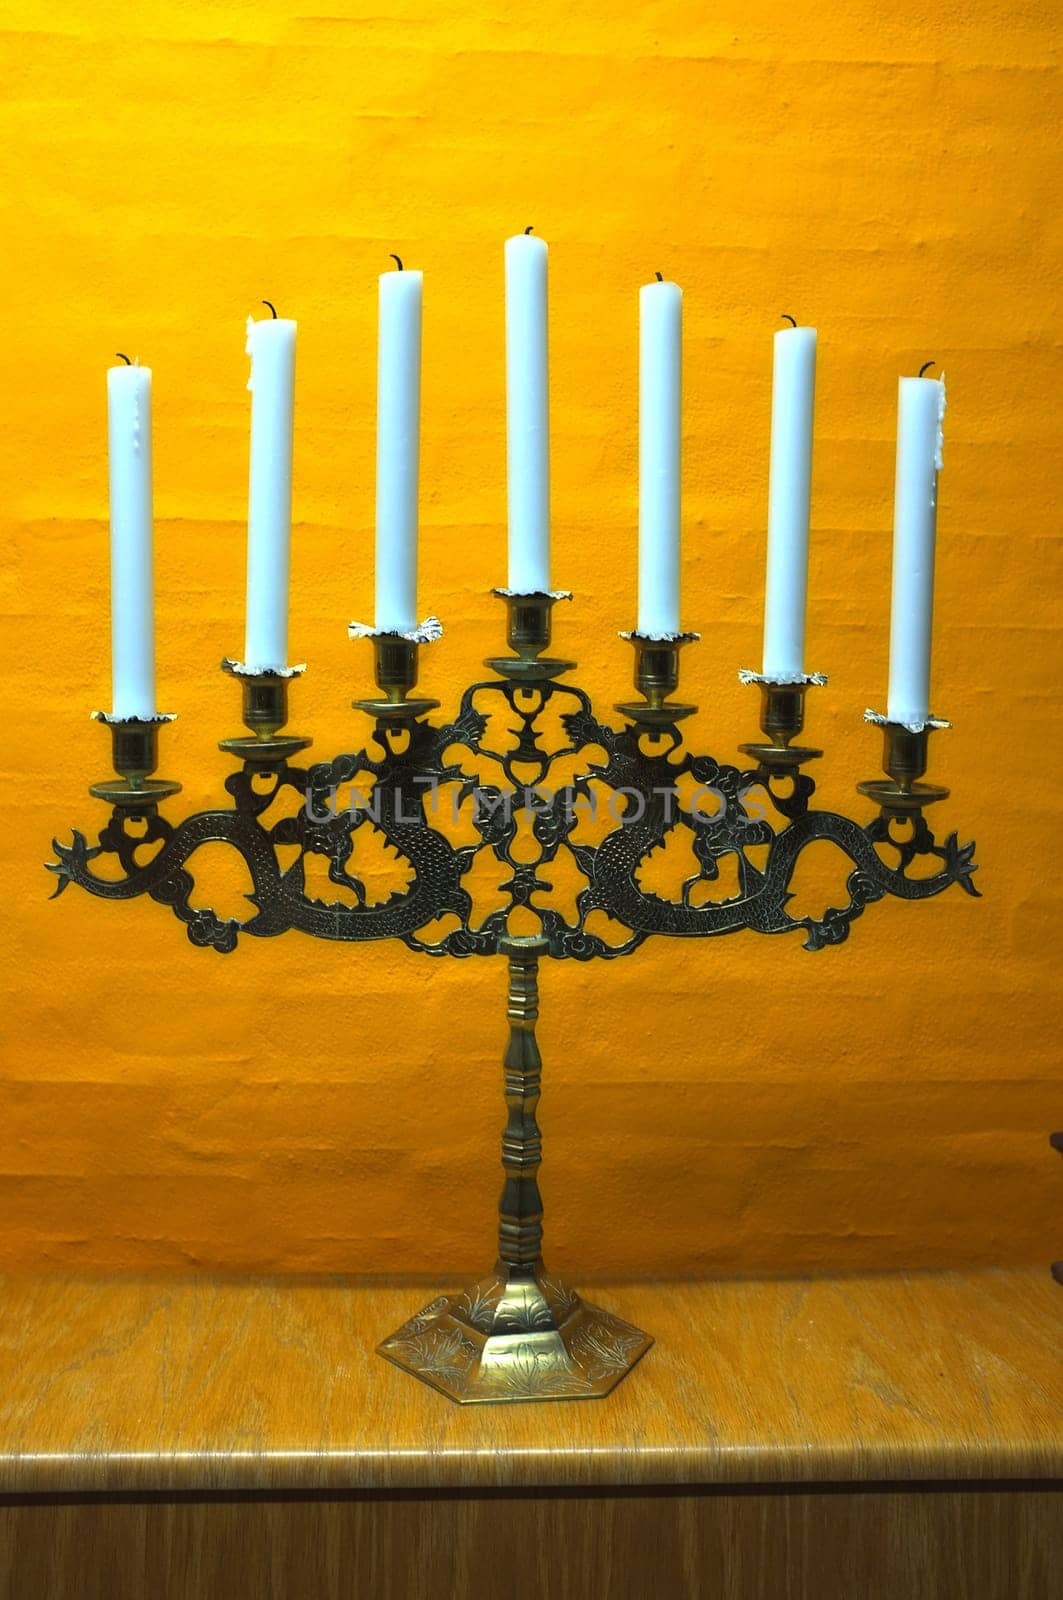 Candle, vintage and holder in church on table at interior of room or cathedral. Wax, brass and retro candlestick for decoration at temple, wood and copper metal with antique candelabra for lighting by YuriArcurs